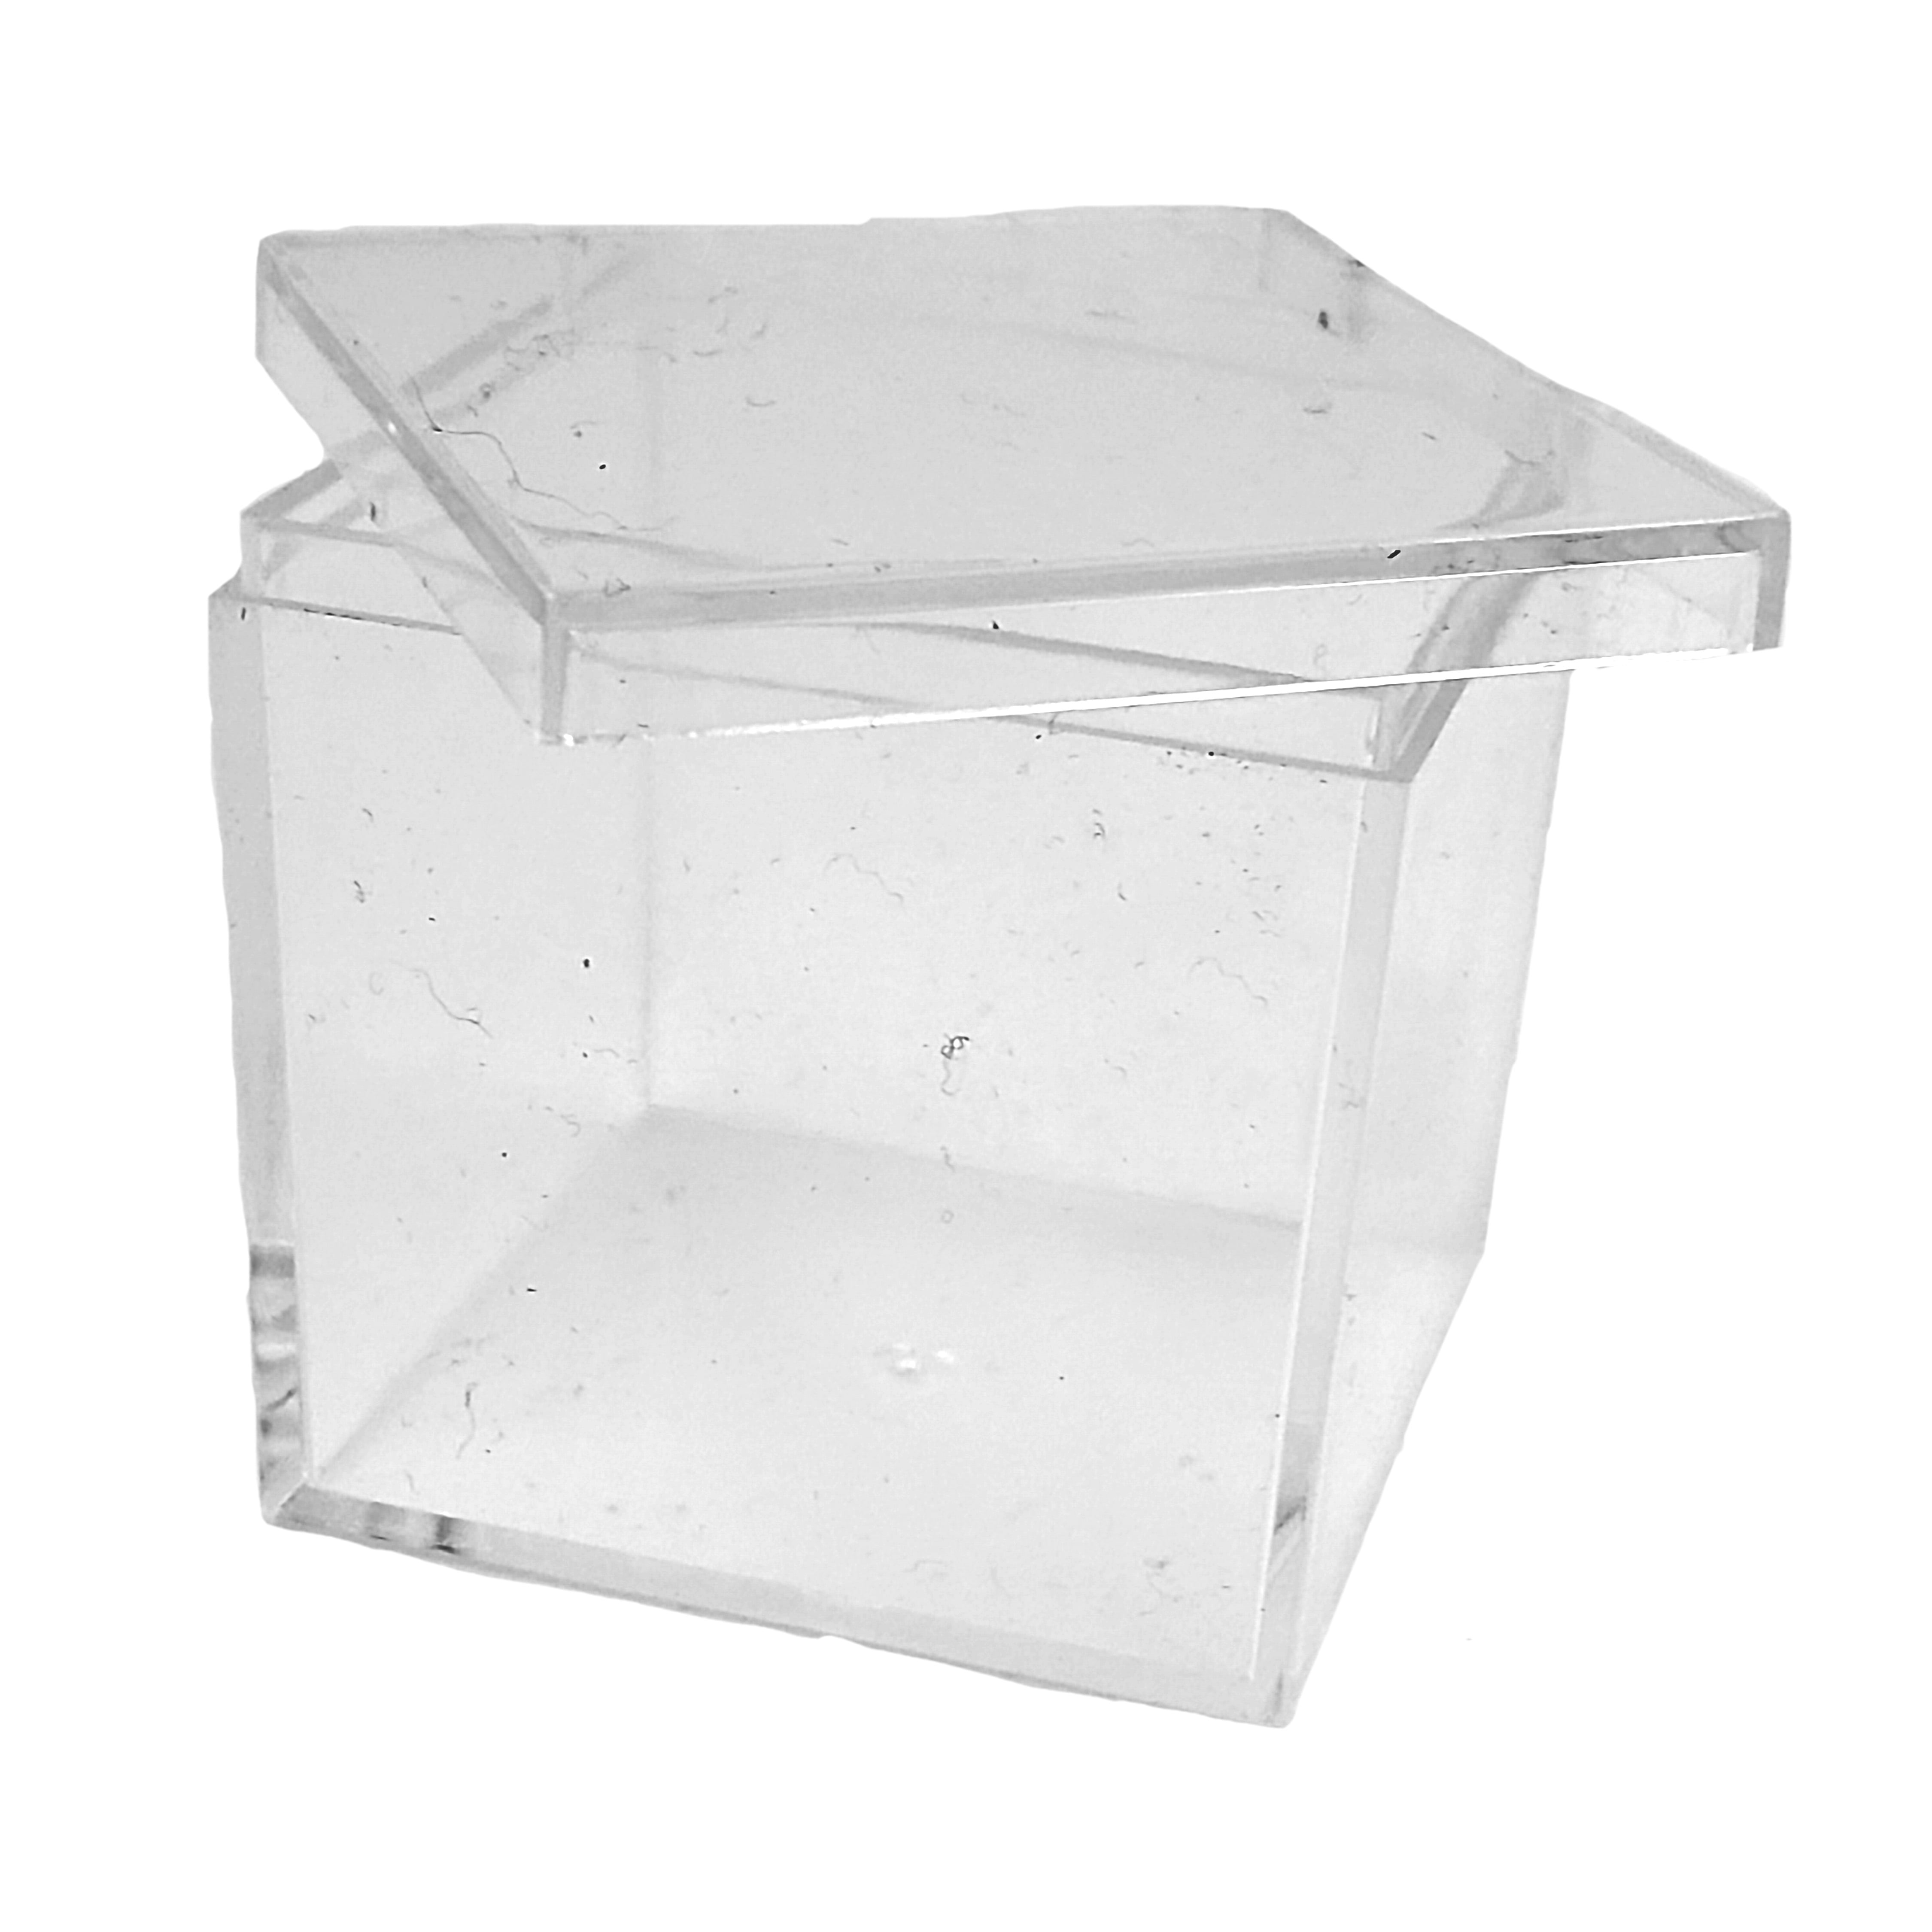 Clear Tek Clear Acrylic Large Candy Container - Display Box - 7 3/4